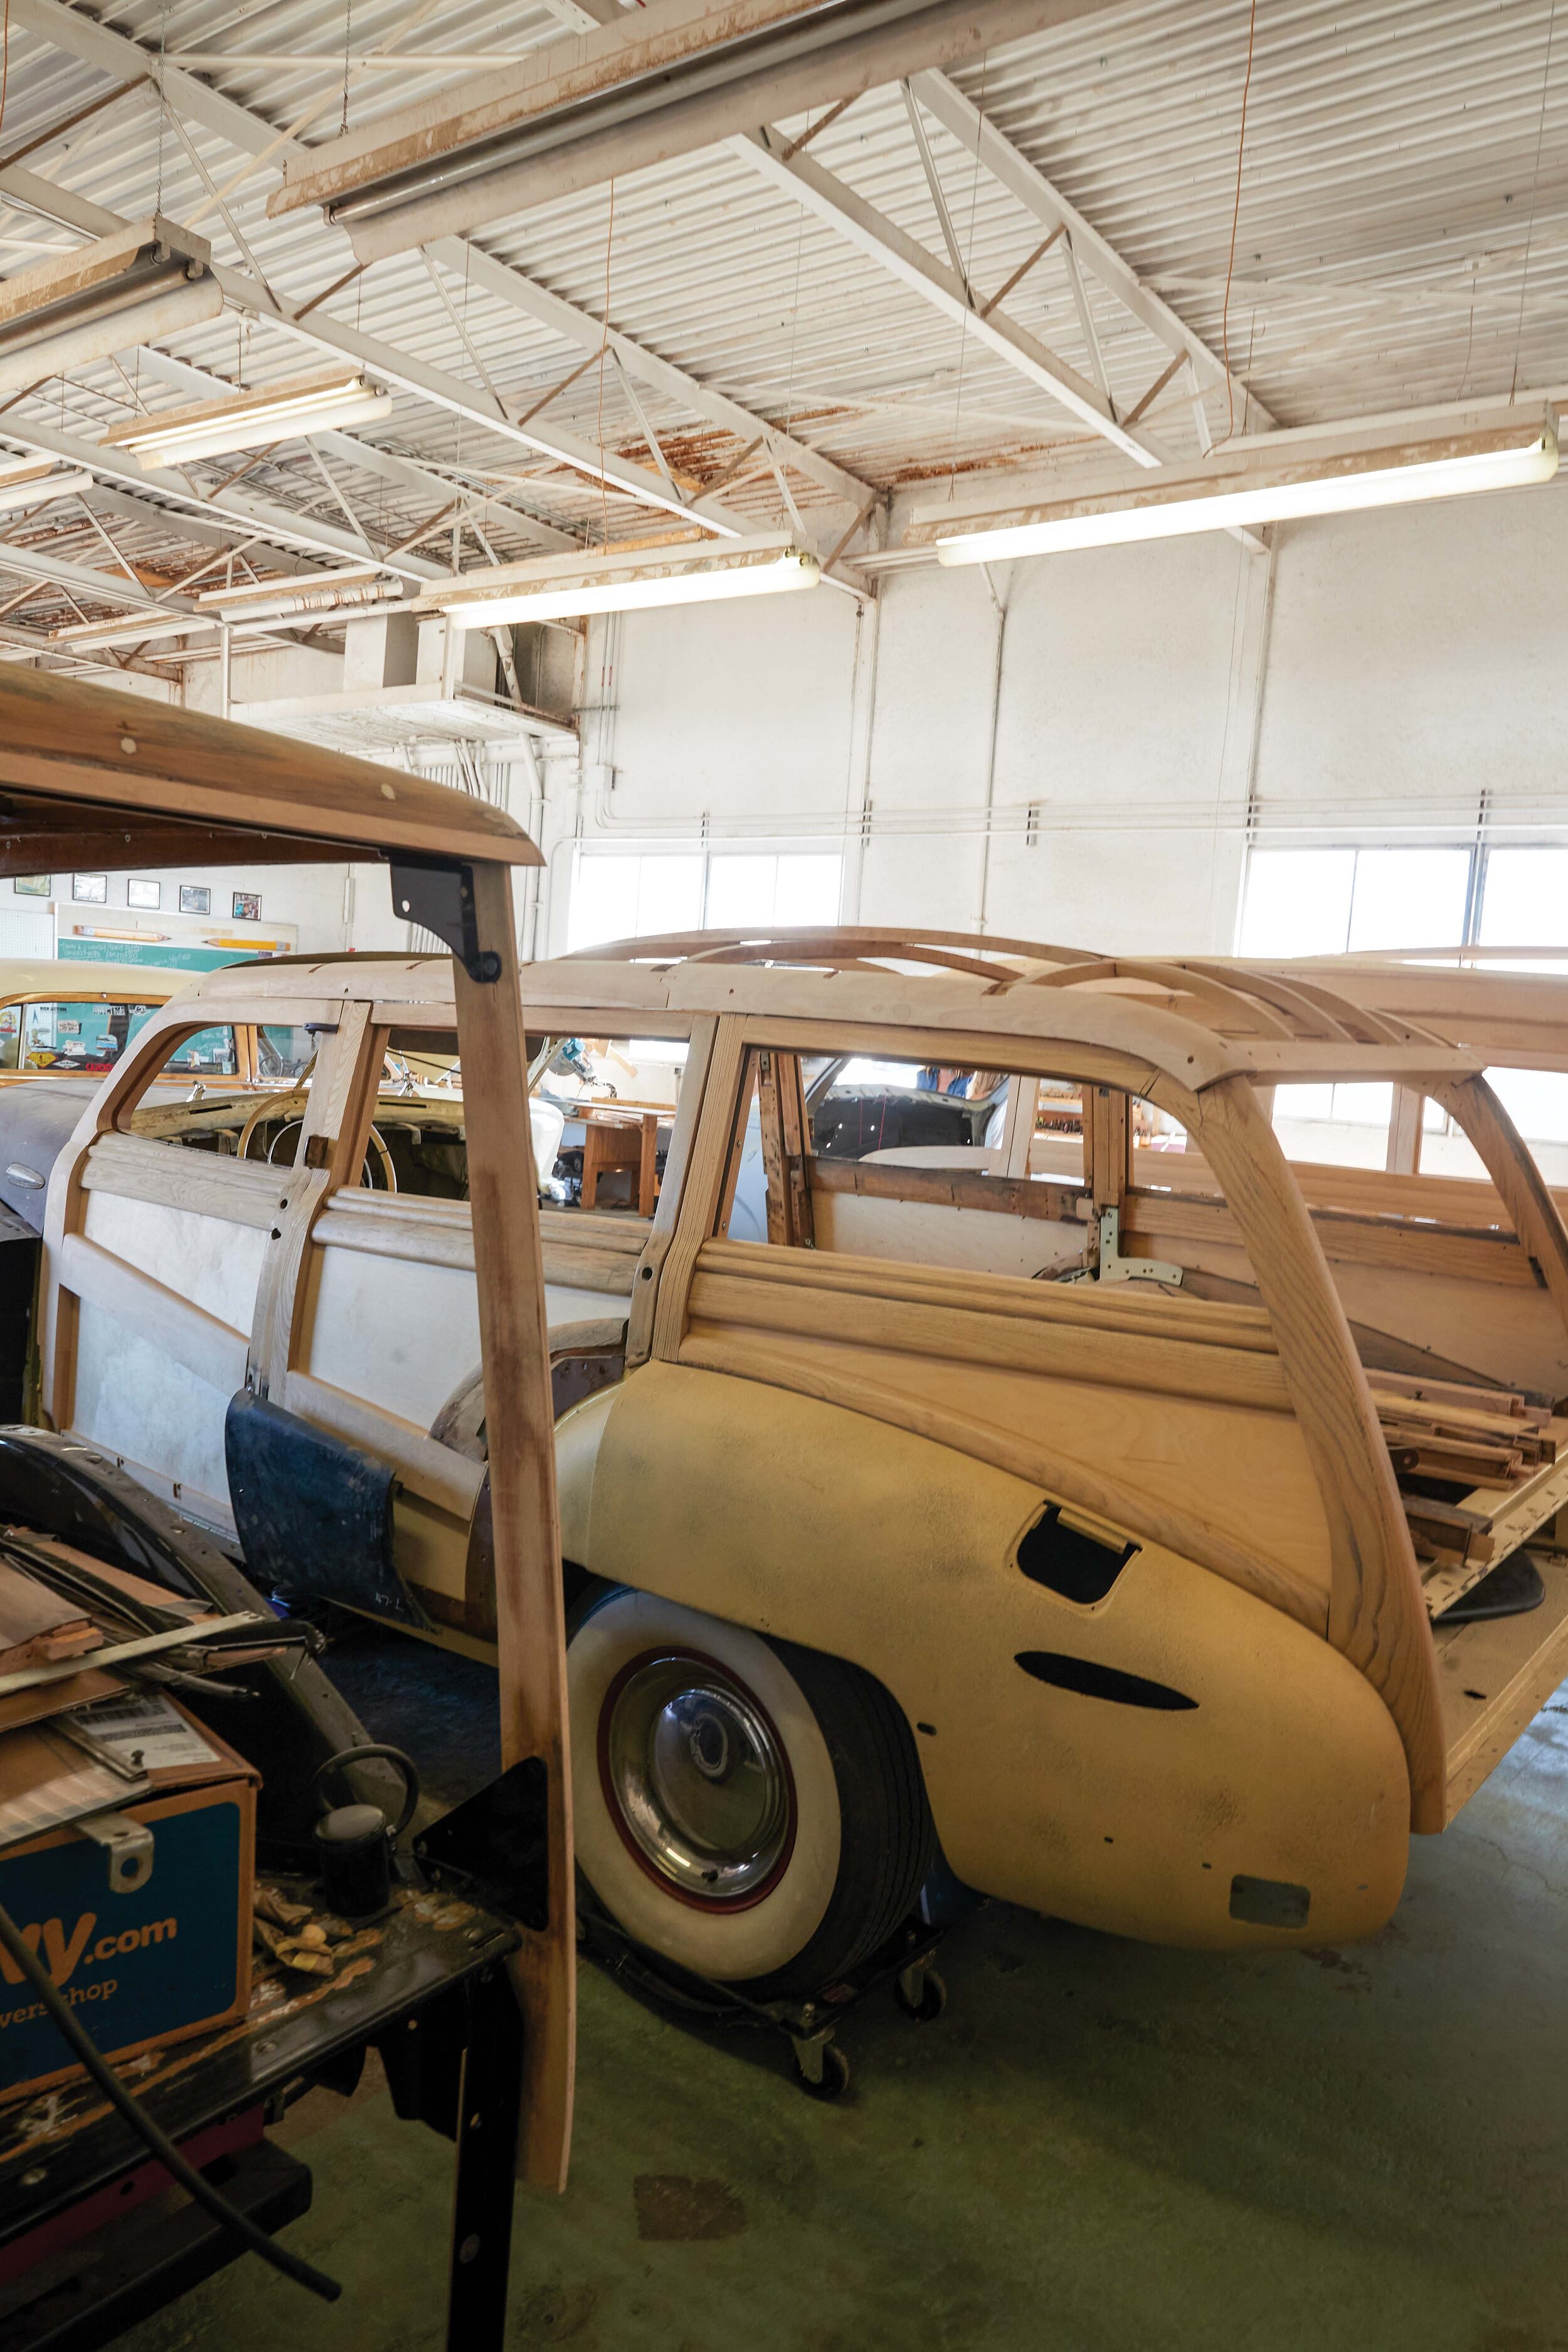  It can take up to five months for Guerrero to restore a single vehicle. 